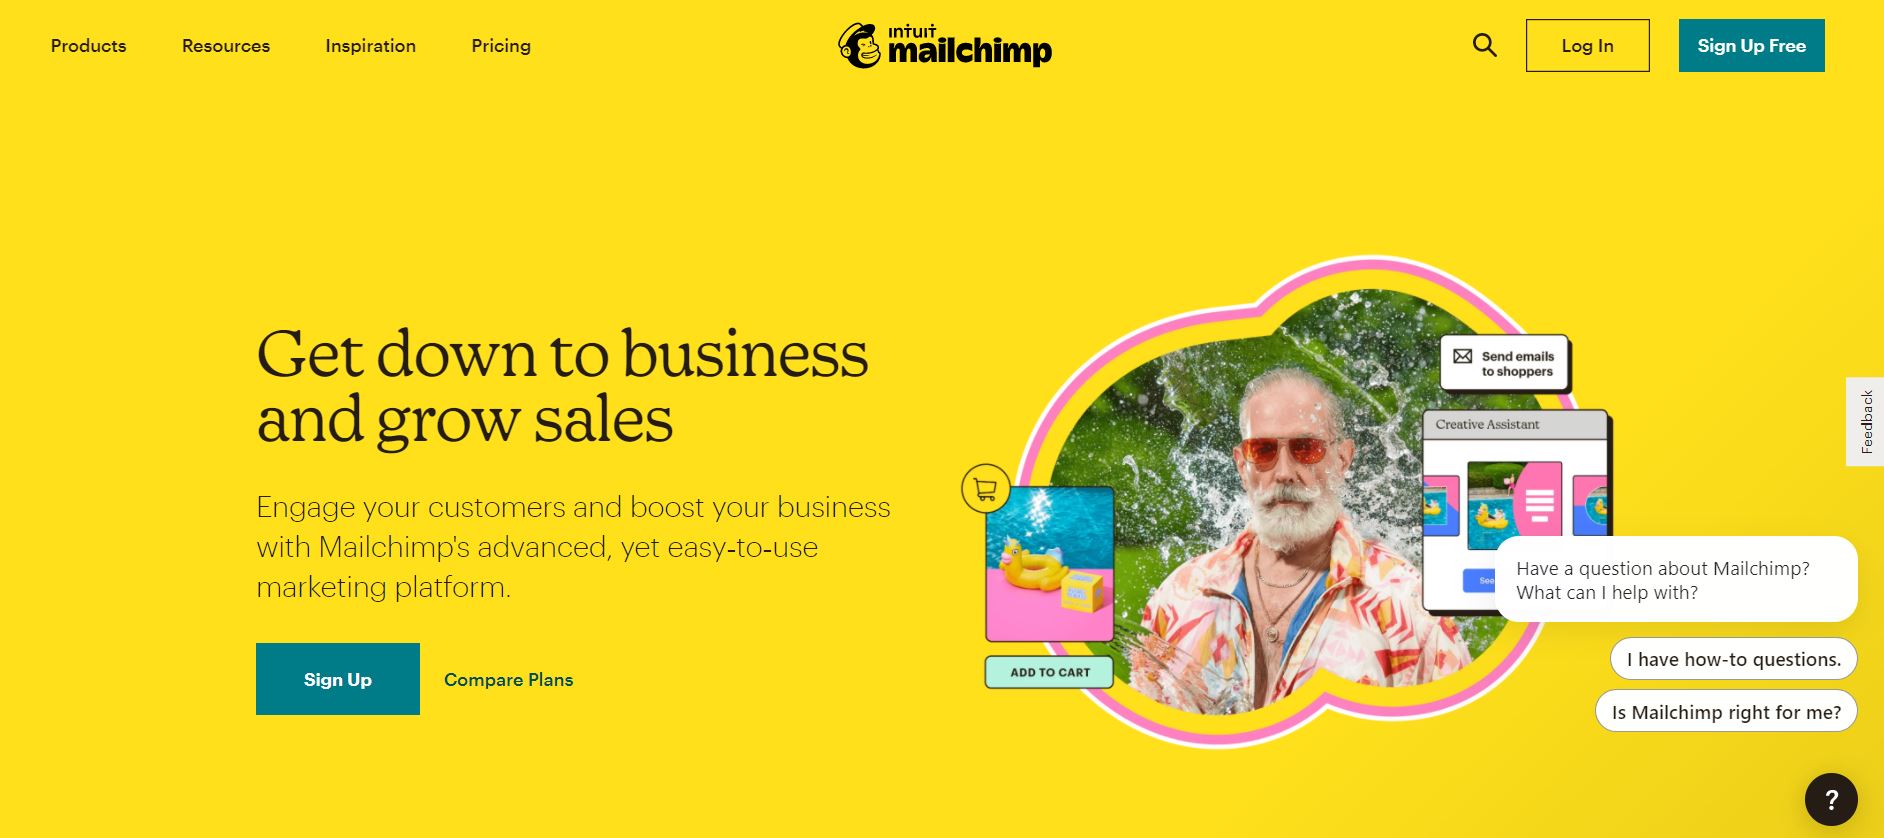 Apps and Tools for Small Businesses| MailChimp.